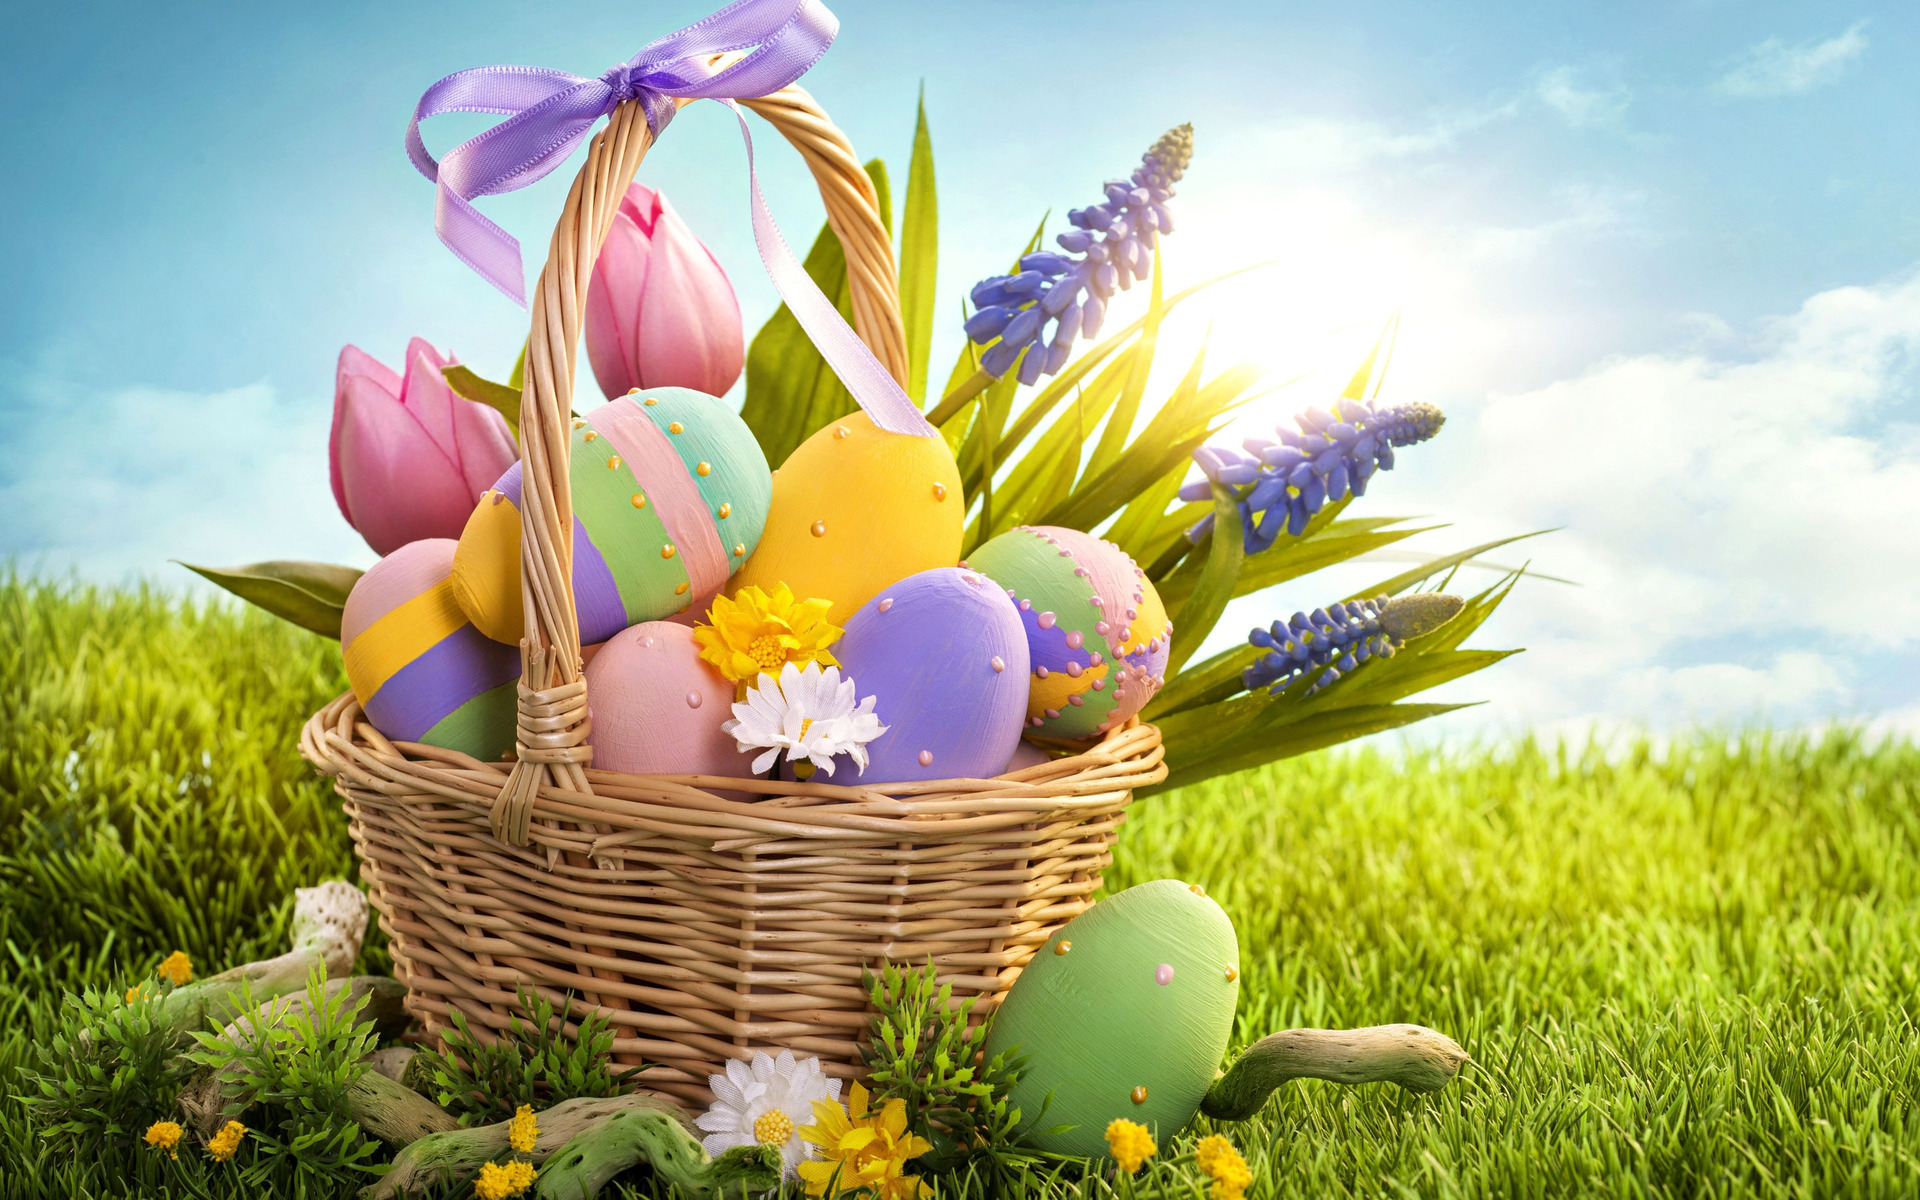 Is Under The Easter Wallpaper Category Of HD